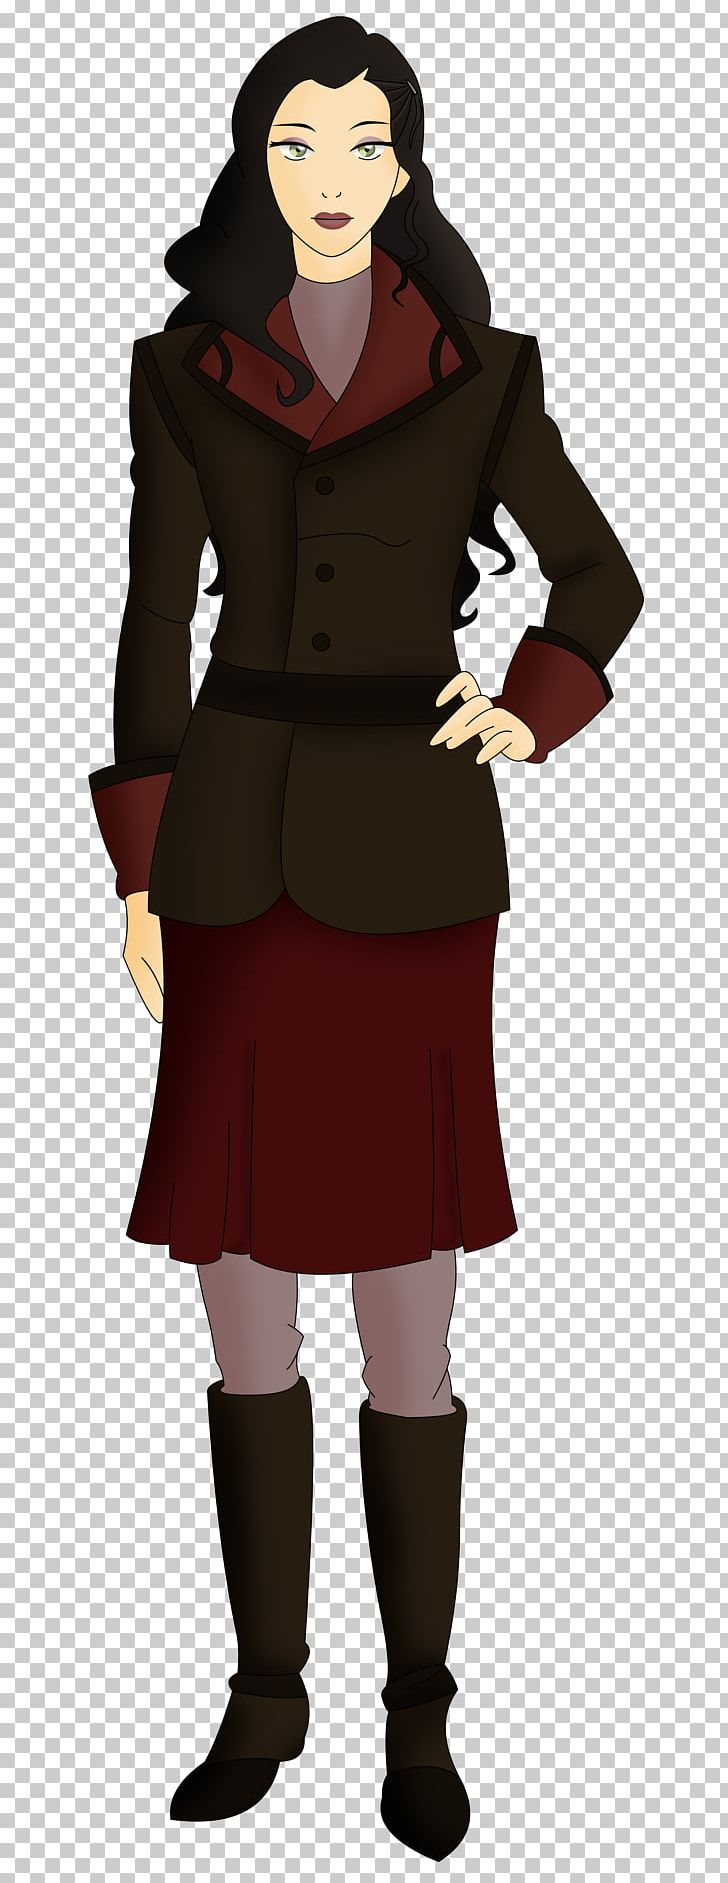 Asami Sato The Legend Of Korra PNG, Clipart, Anime, Asami, Asami Sato, Avatar, Avatar The Last Airbender Free PNG Download